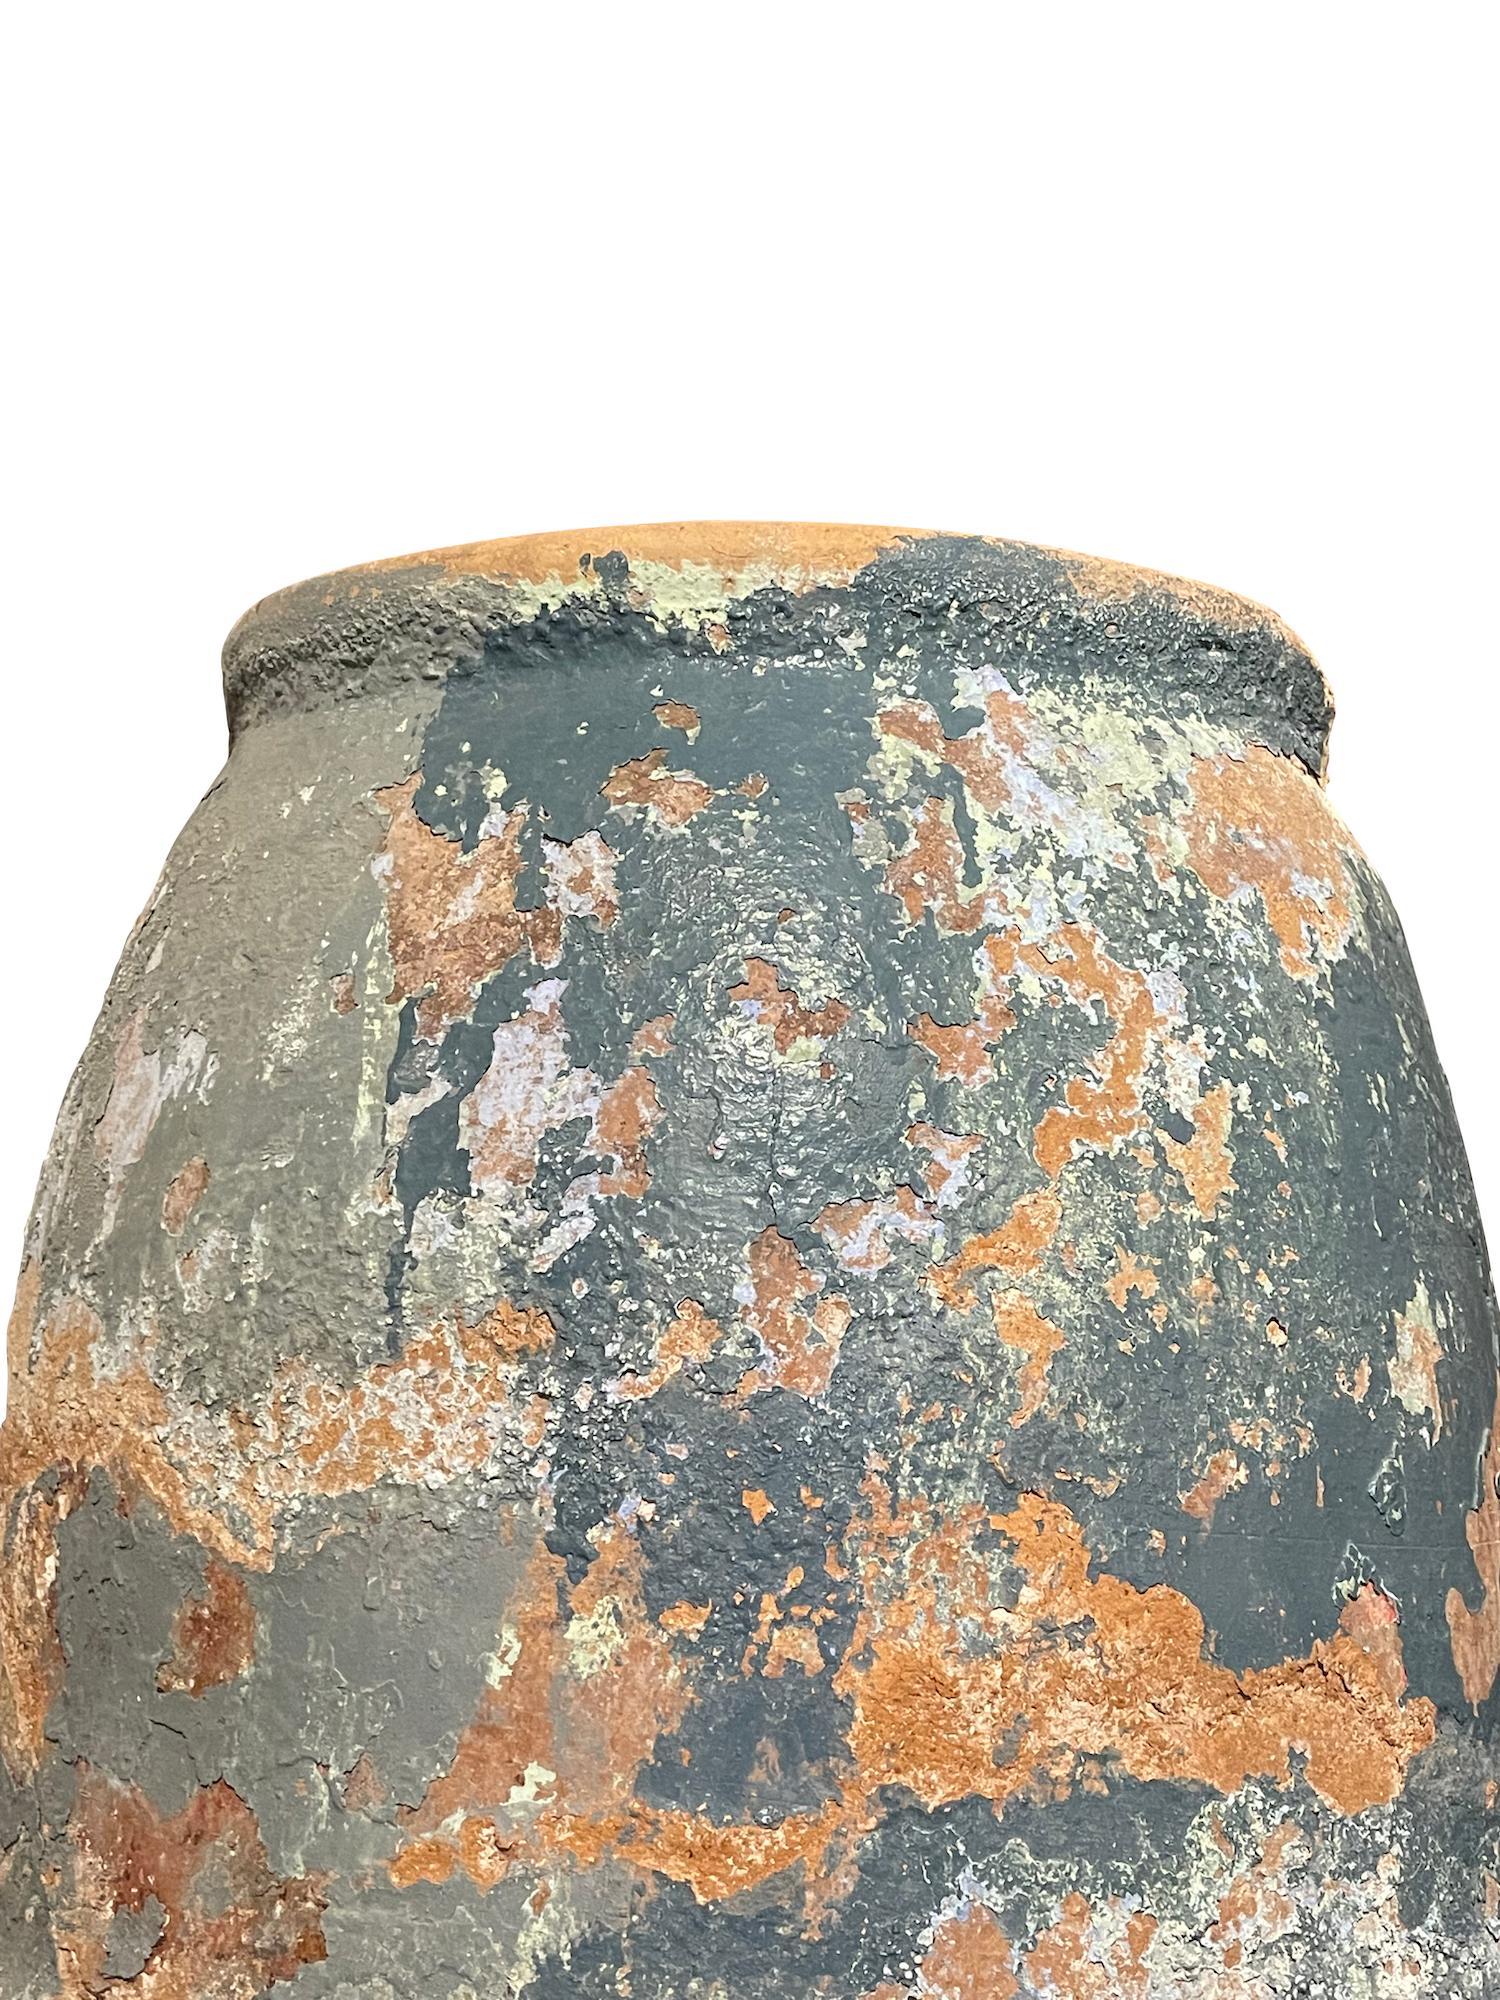 19th century Spanish large terracotta olive pot.
Unearthed from a very large family run olive oil producing business in southern Spain
Beautiful and natural aged patina.
Exceptional in color of shades of blue.
One of many pieces from a large and